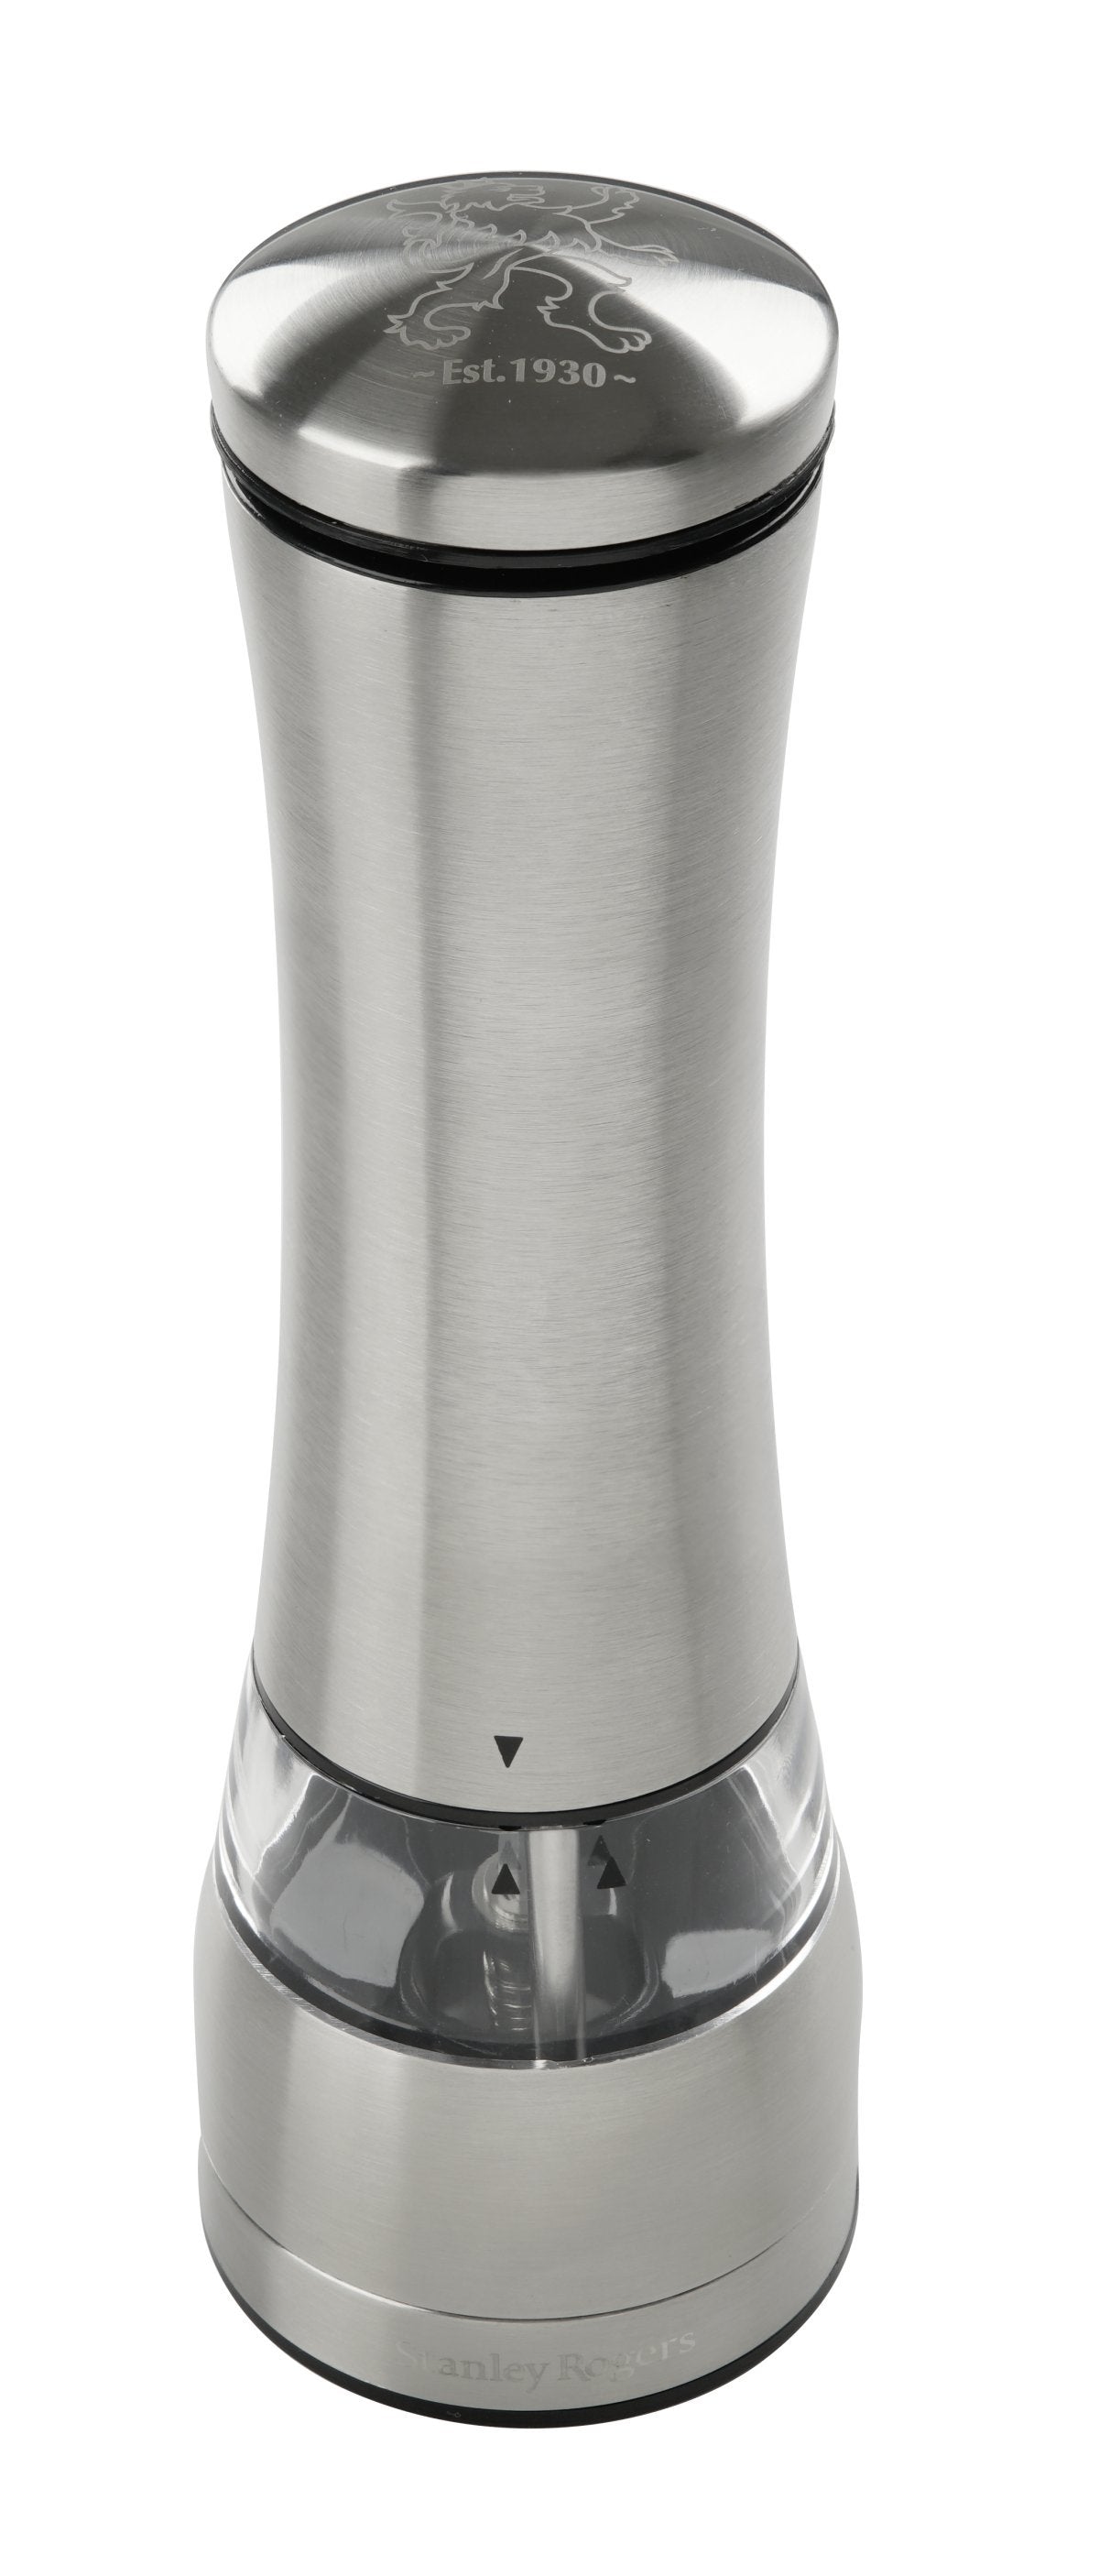 Stanley Rogers Manual Salt And Pepper Mill, Stainless Steel